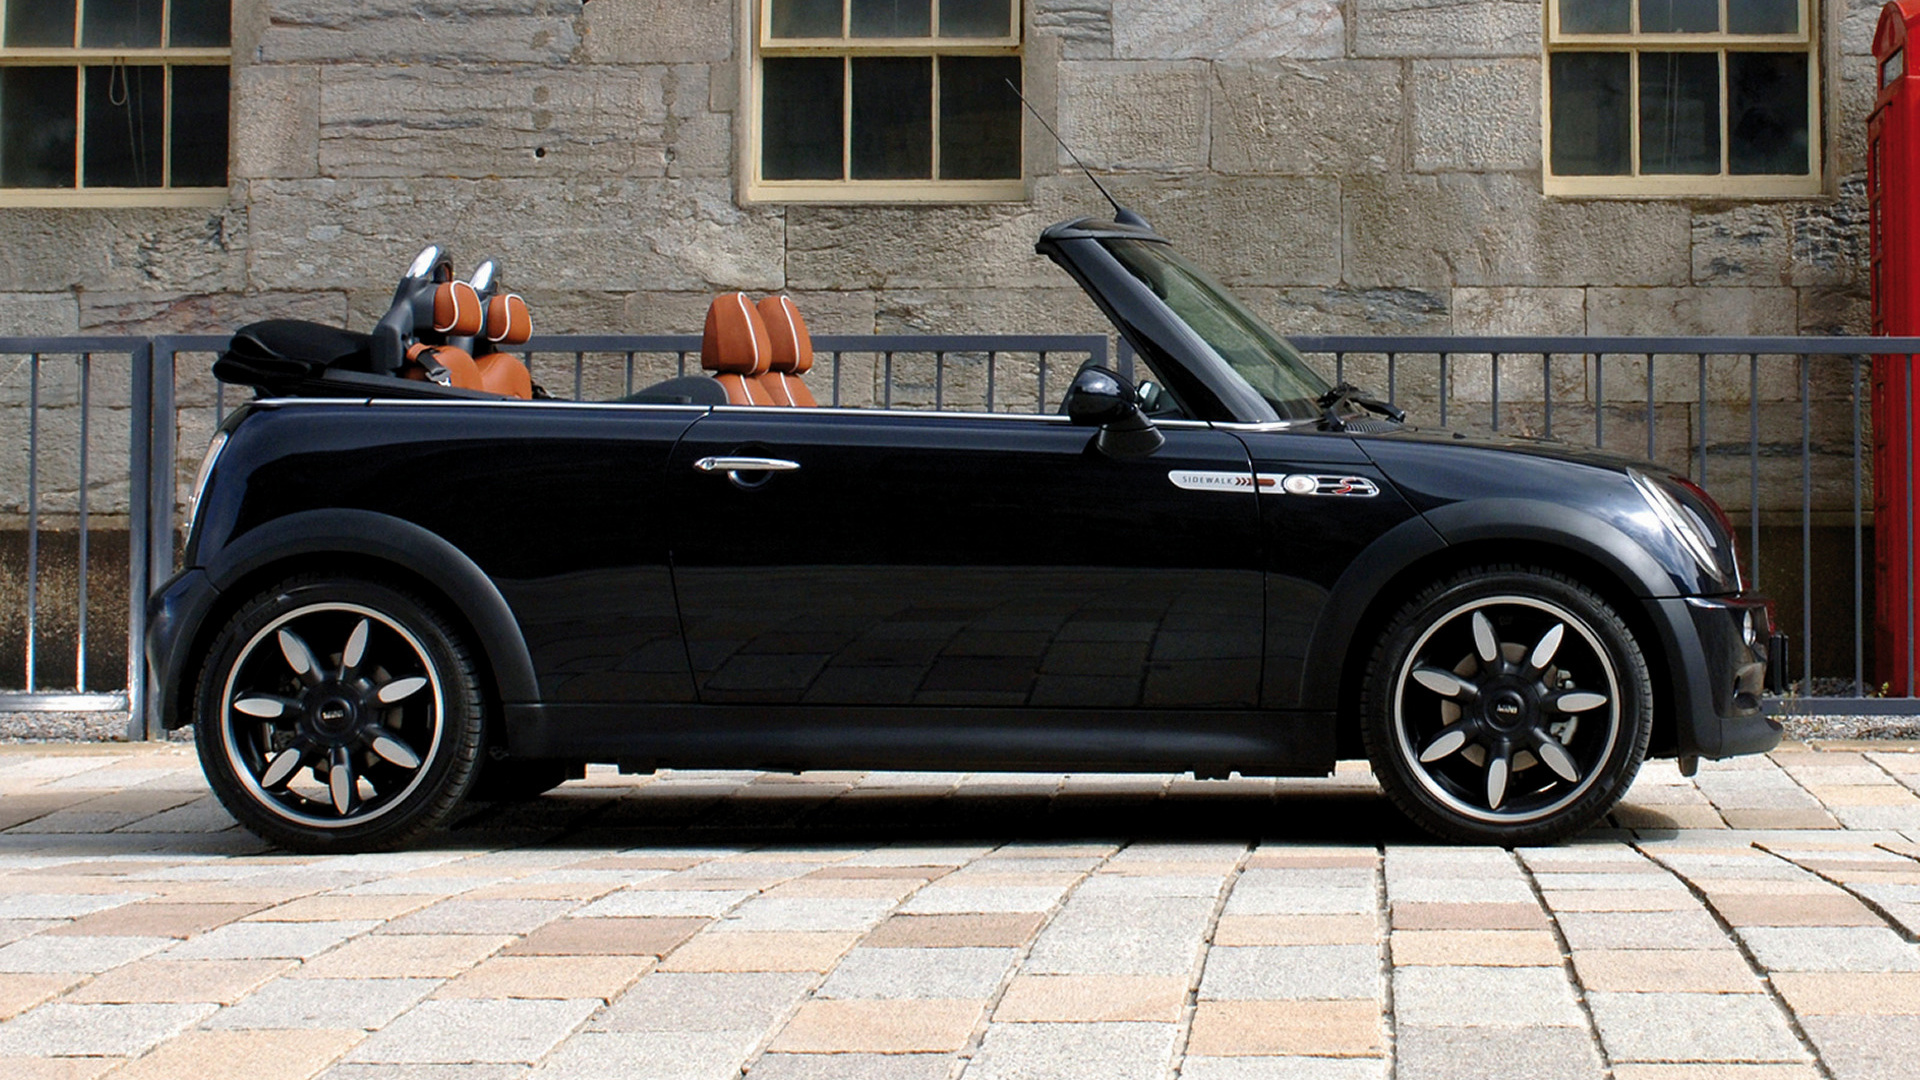 2007 Mini Cooper S Convertible Sidewalk (UK) - Wallpapers and HD Images ...